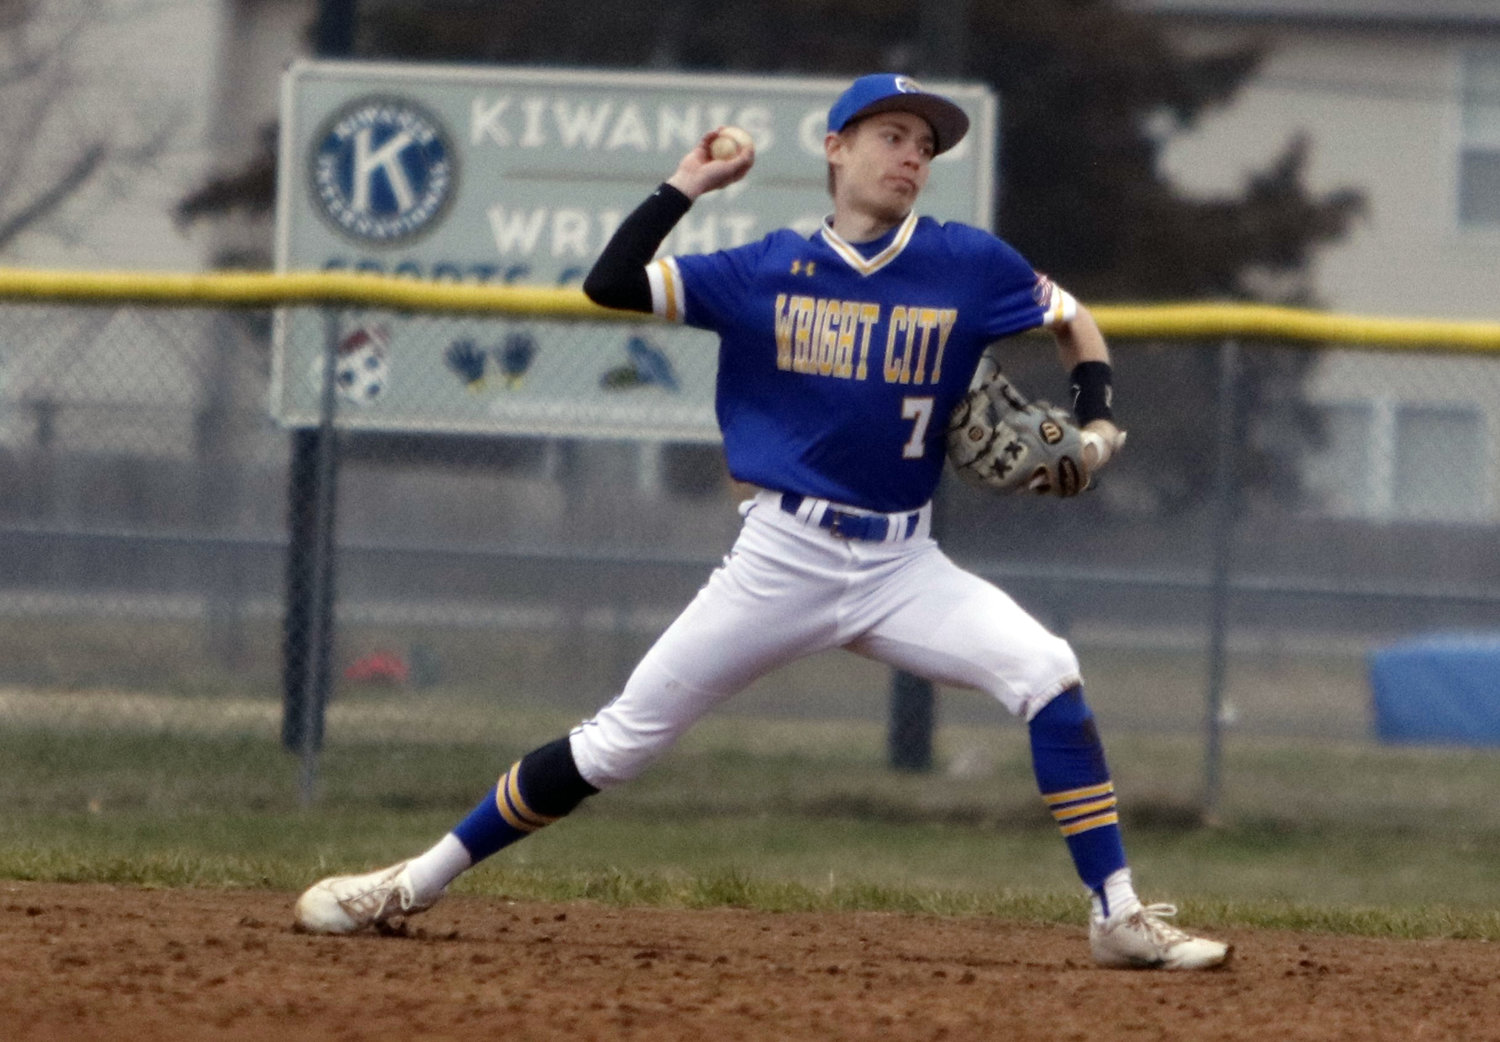 Wright City second baseman Devin Foust throws the ball to first base after making a diving stop in the seventh inning of Wright City’s loss to Rockwood Summit last week.